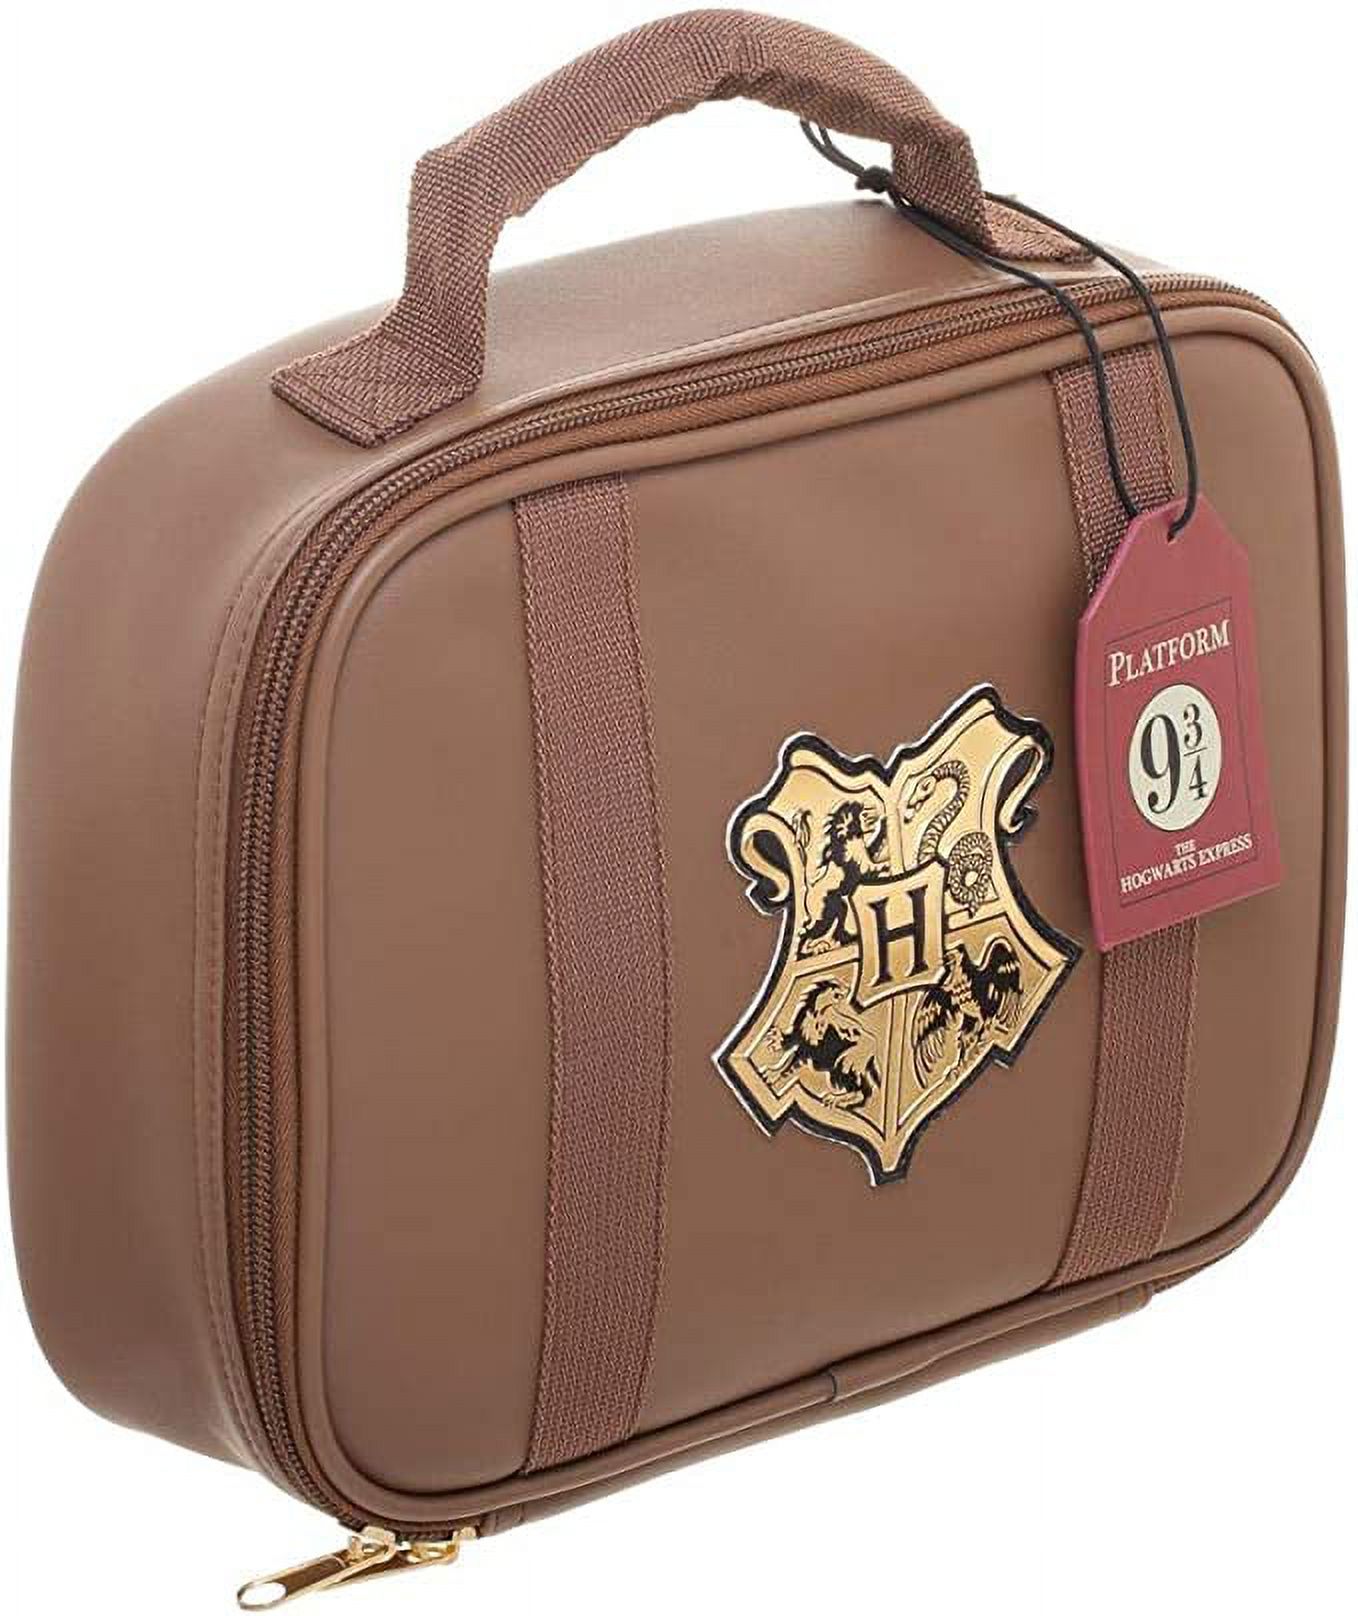 Harry Potter Hogwarts House Trunk Insulated Lunch Box 